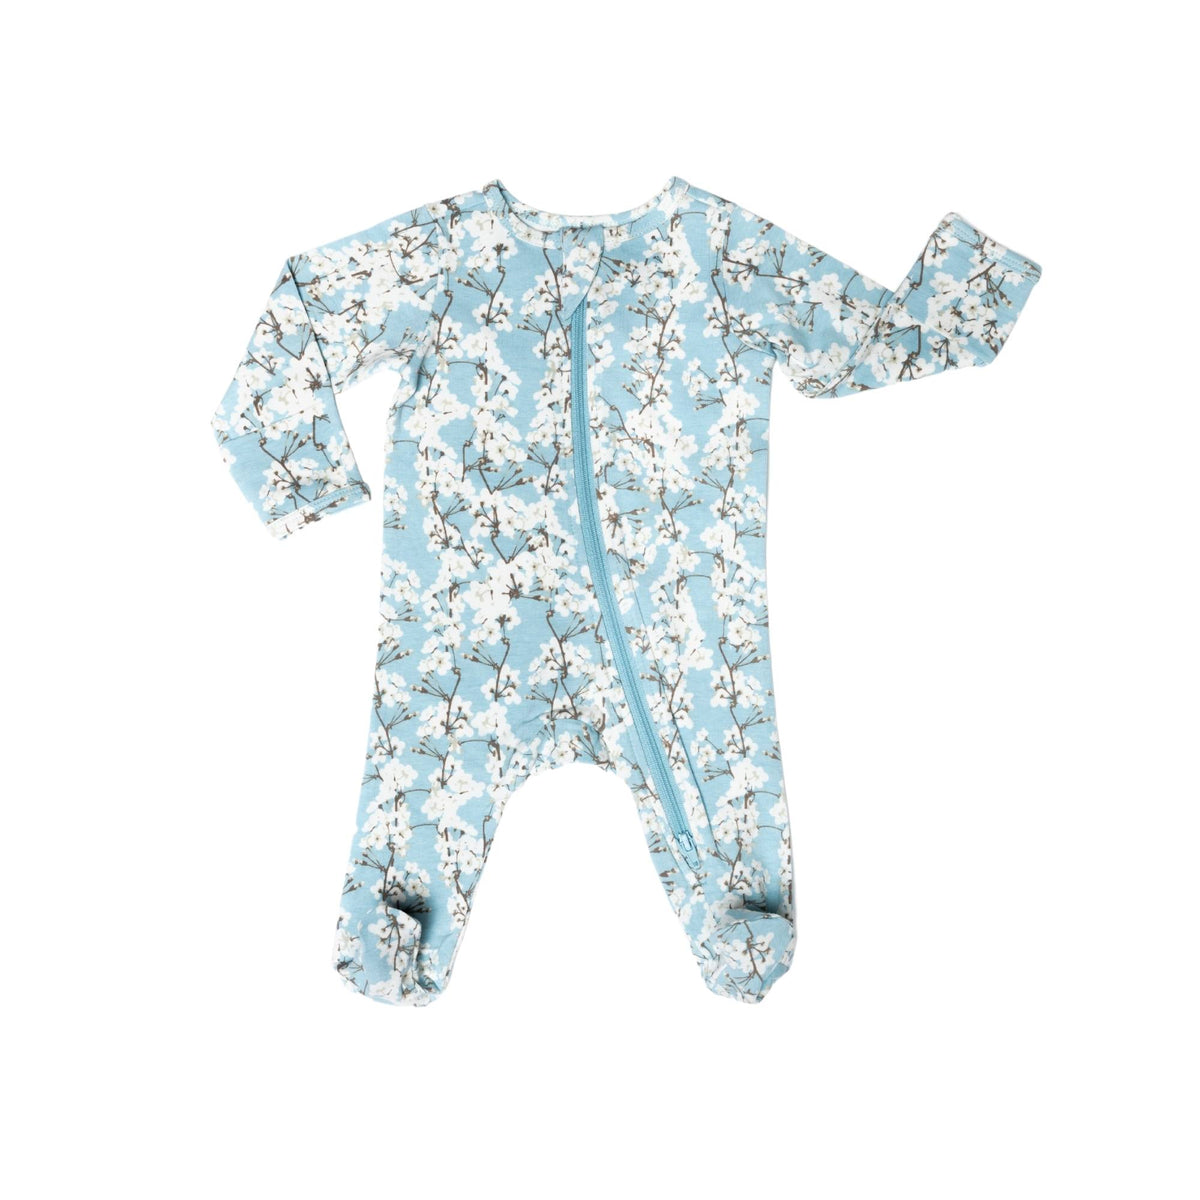 Norani Baby footed zippered onesie in blue and white cherry blossom flowers